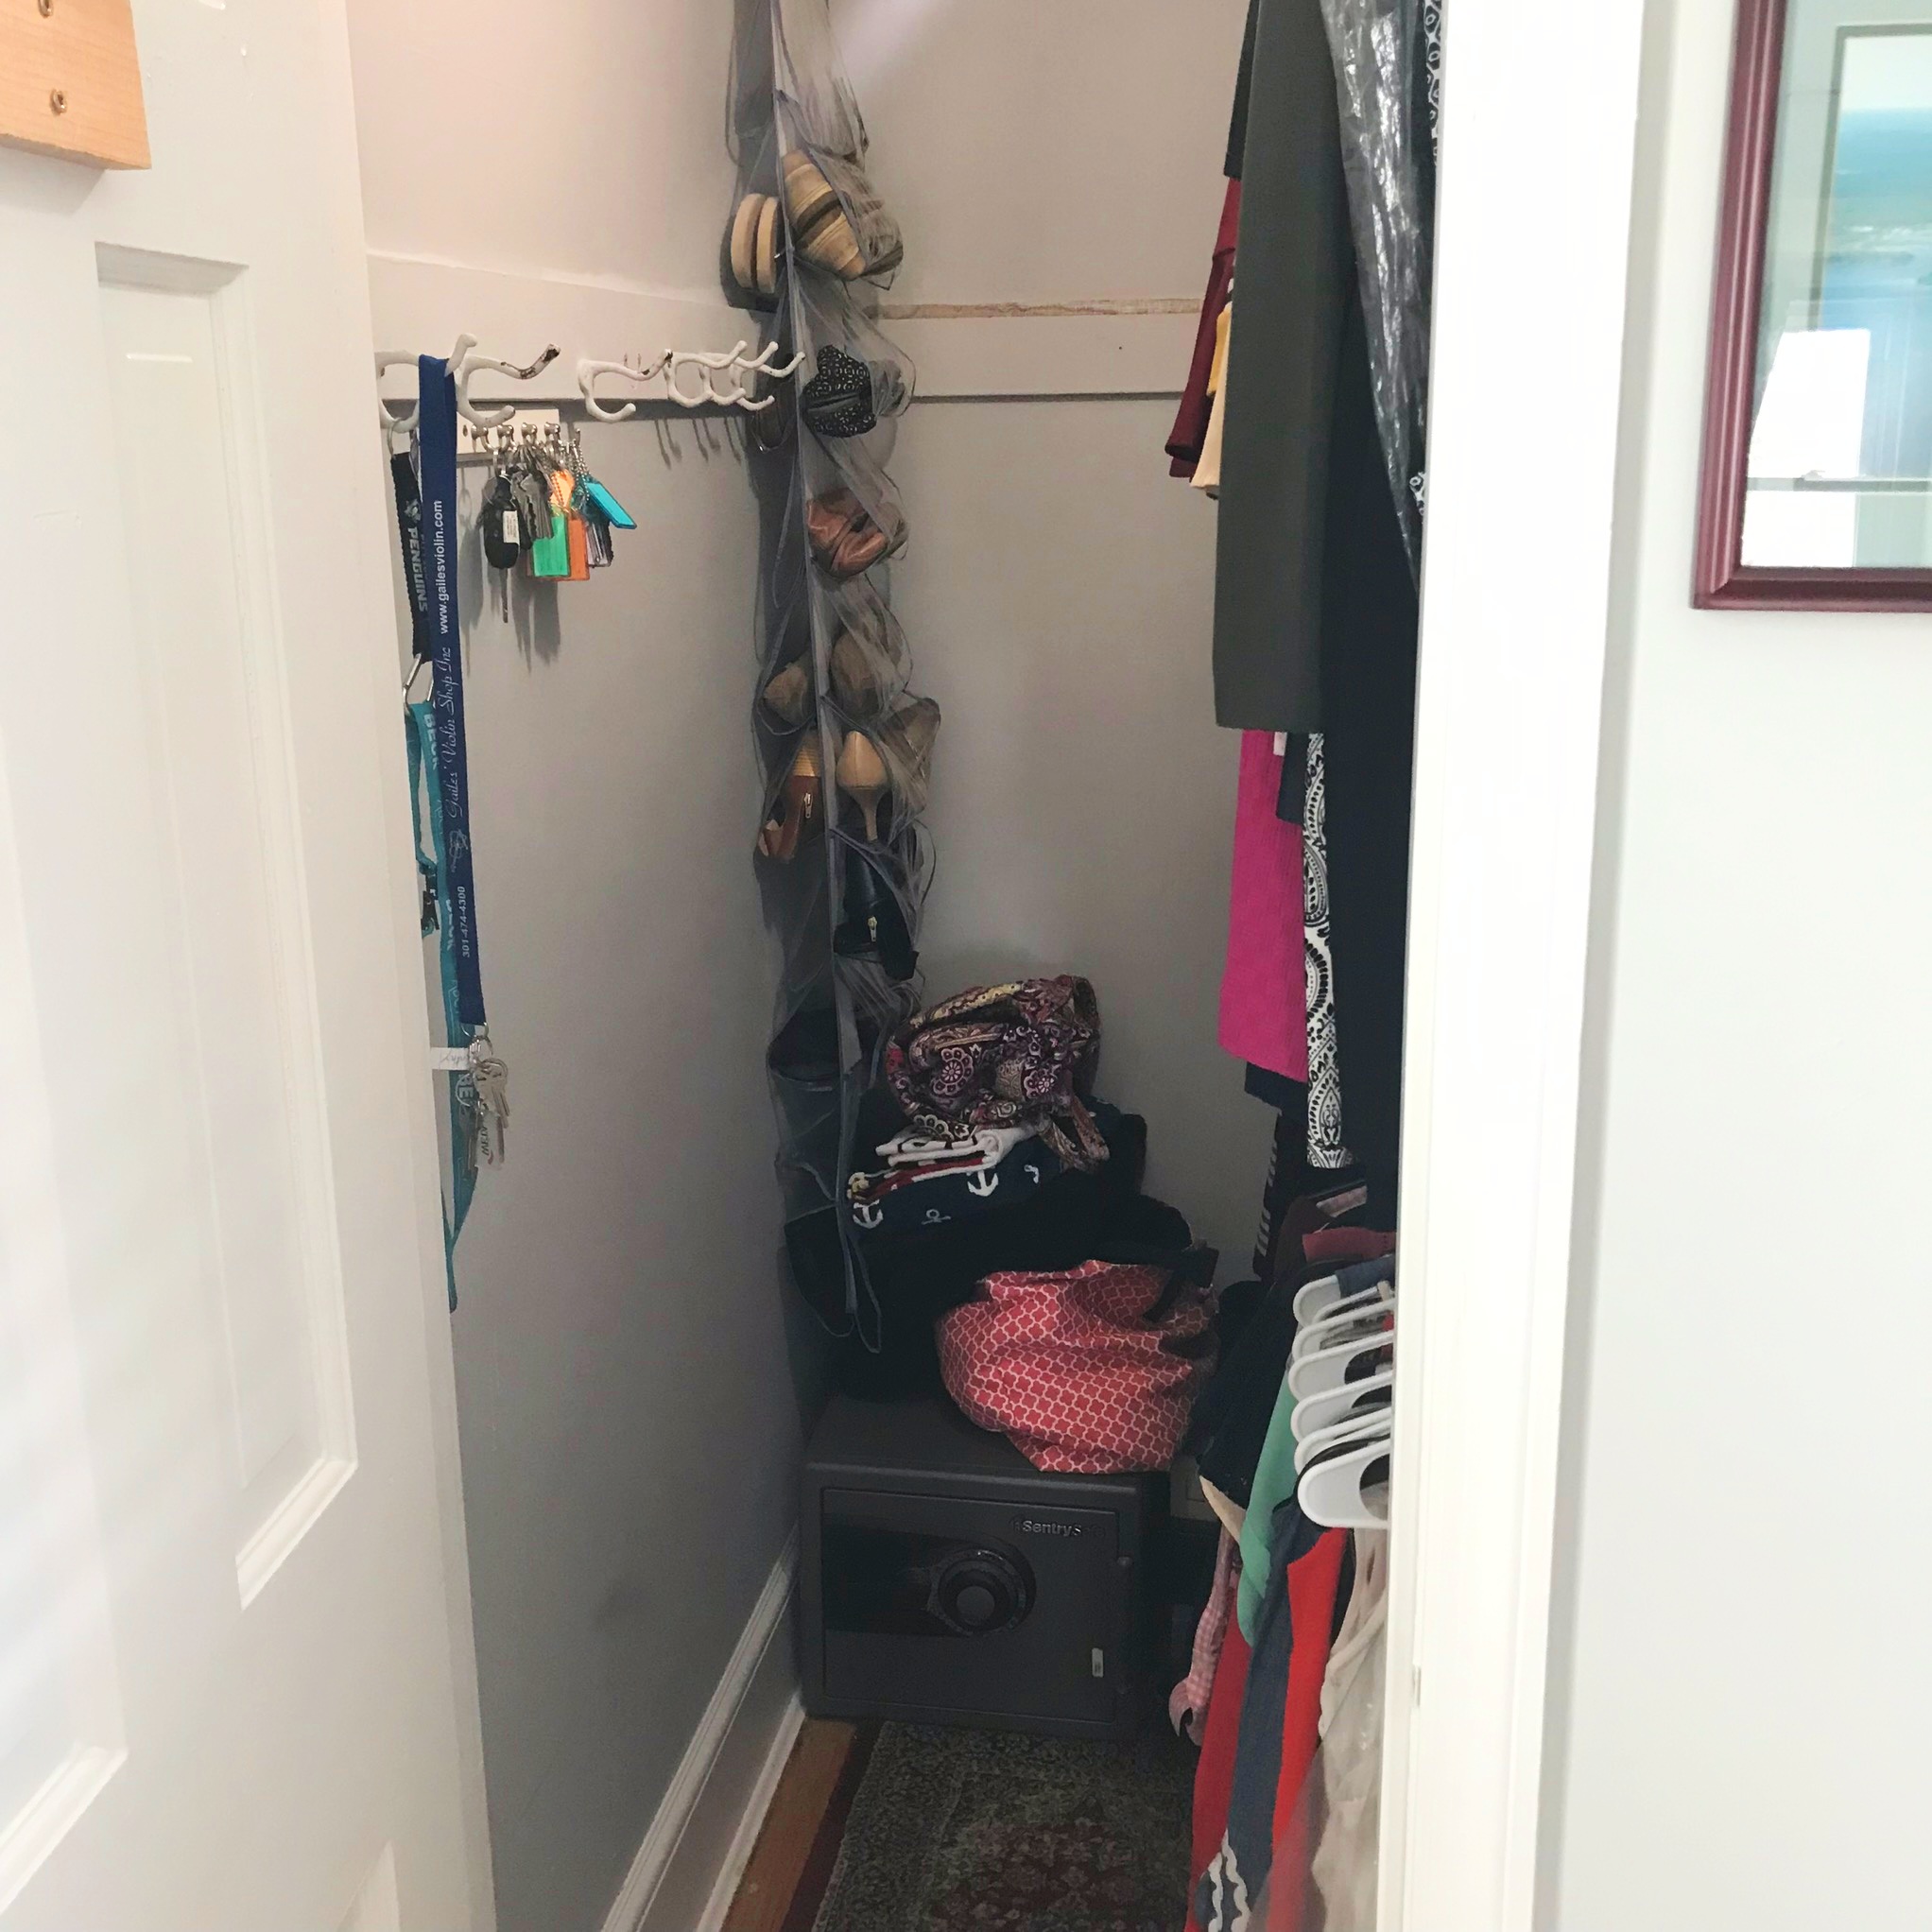 Upper rung of clothes rods are on the side and back walls of the closet, lower rod is just on the side so that the end of the closet can hold tall shoe organizers :) 